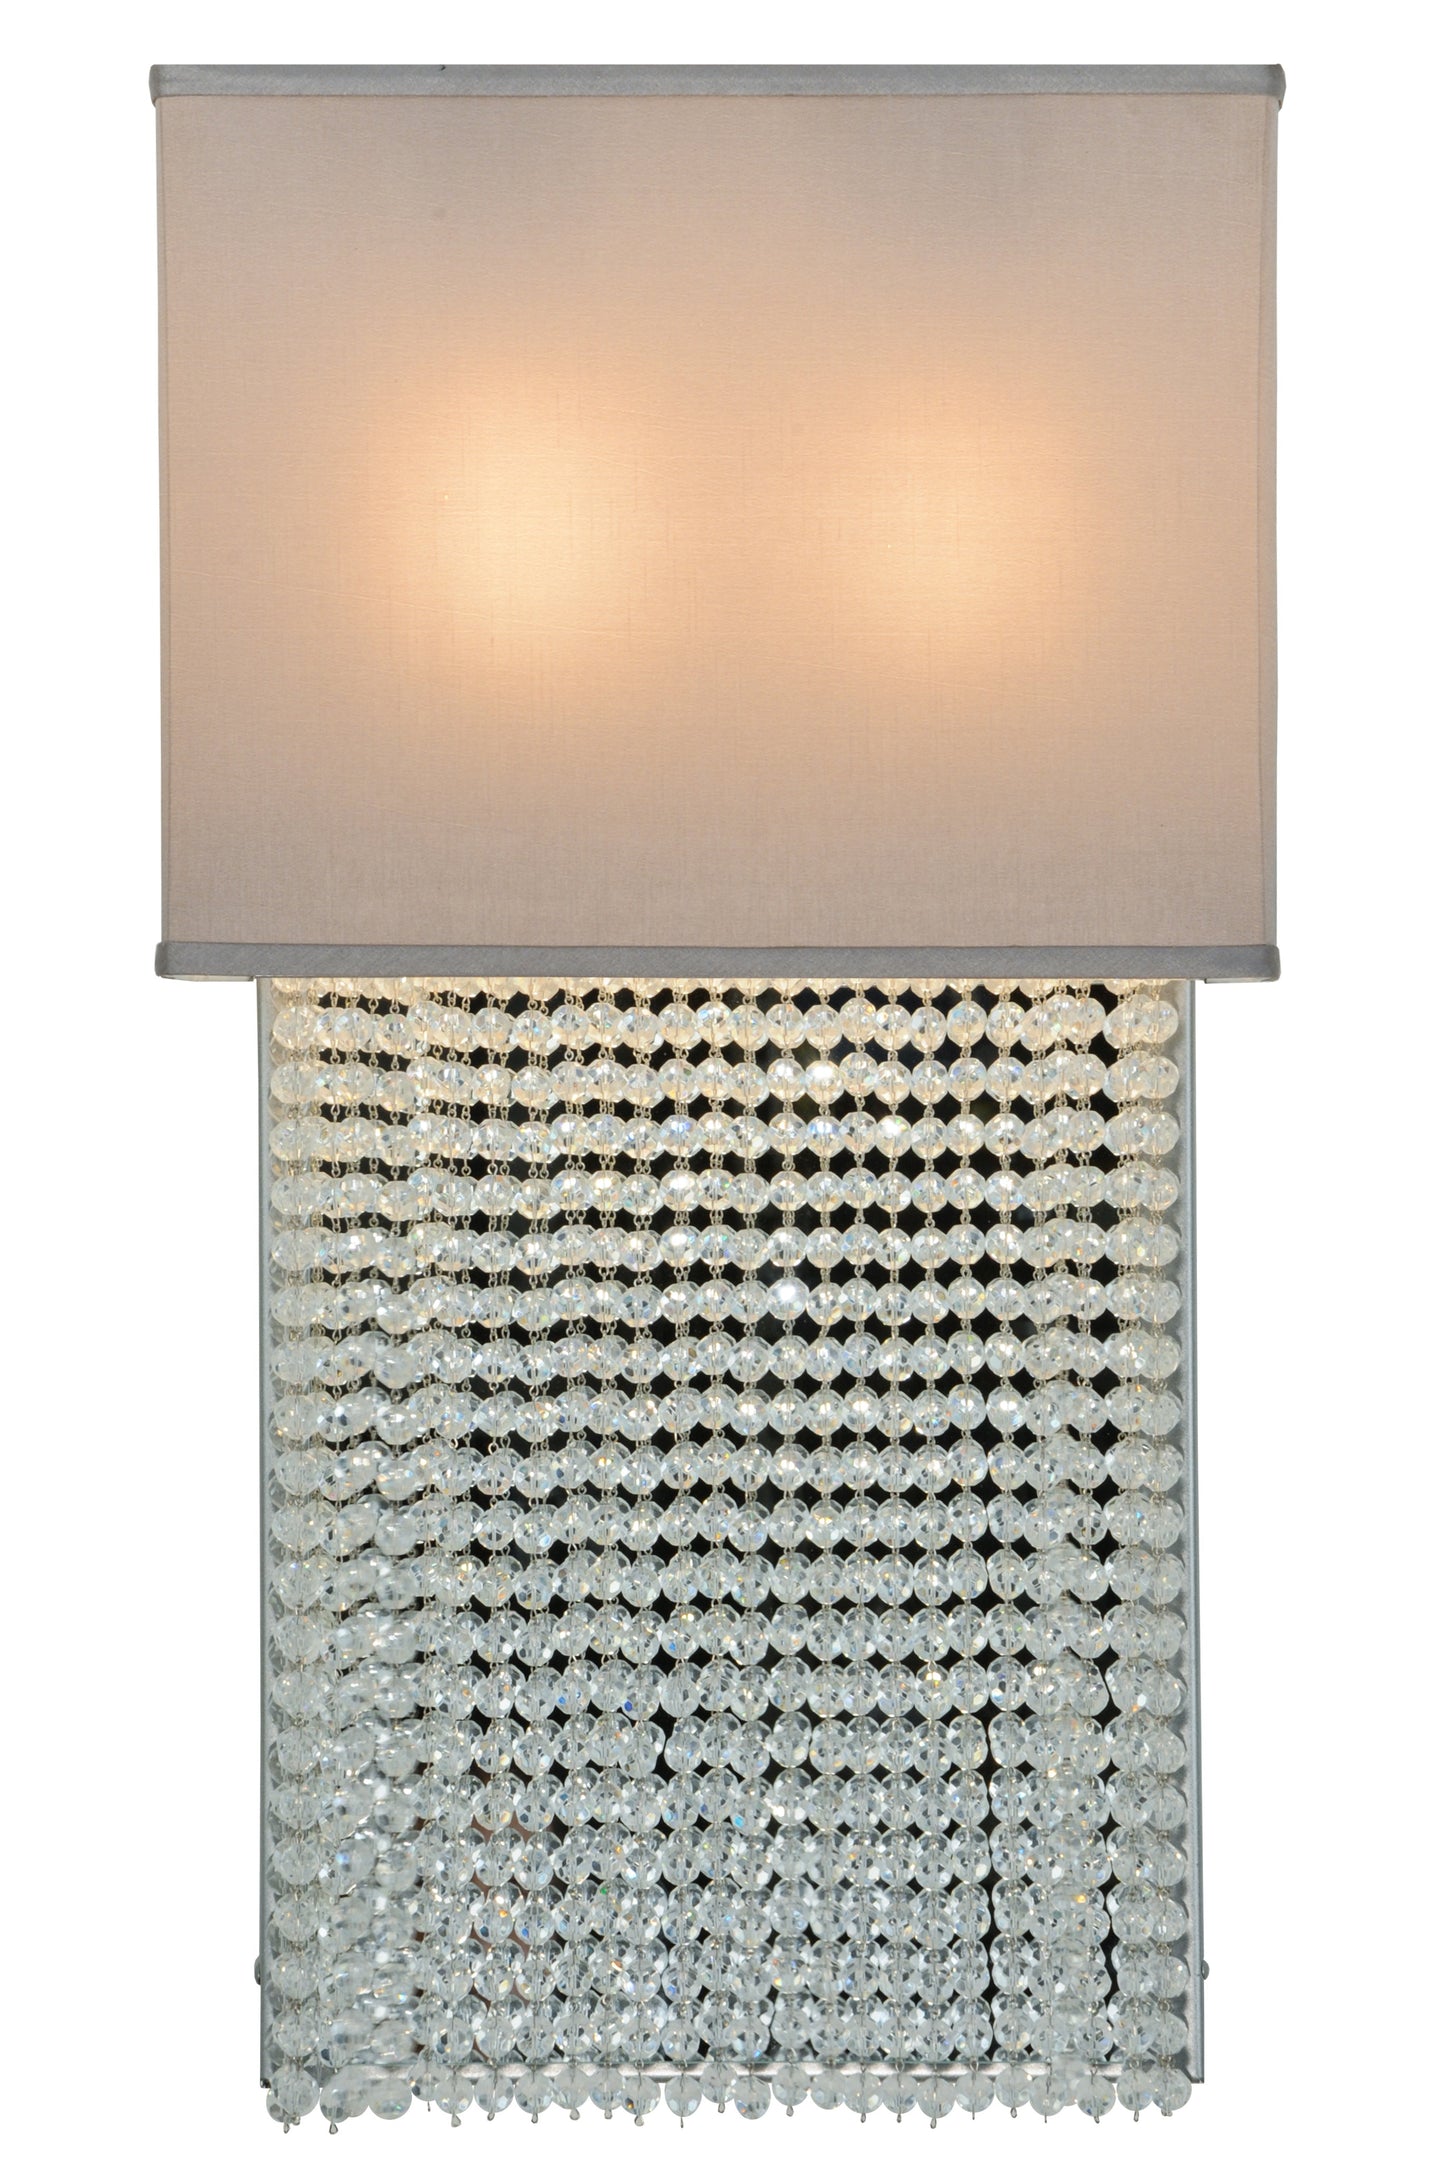 15" Francesca Wall Sconce by 2nd Ave Lighting